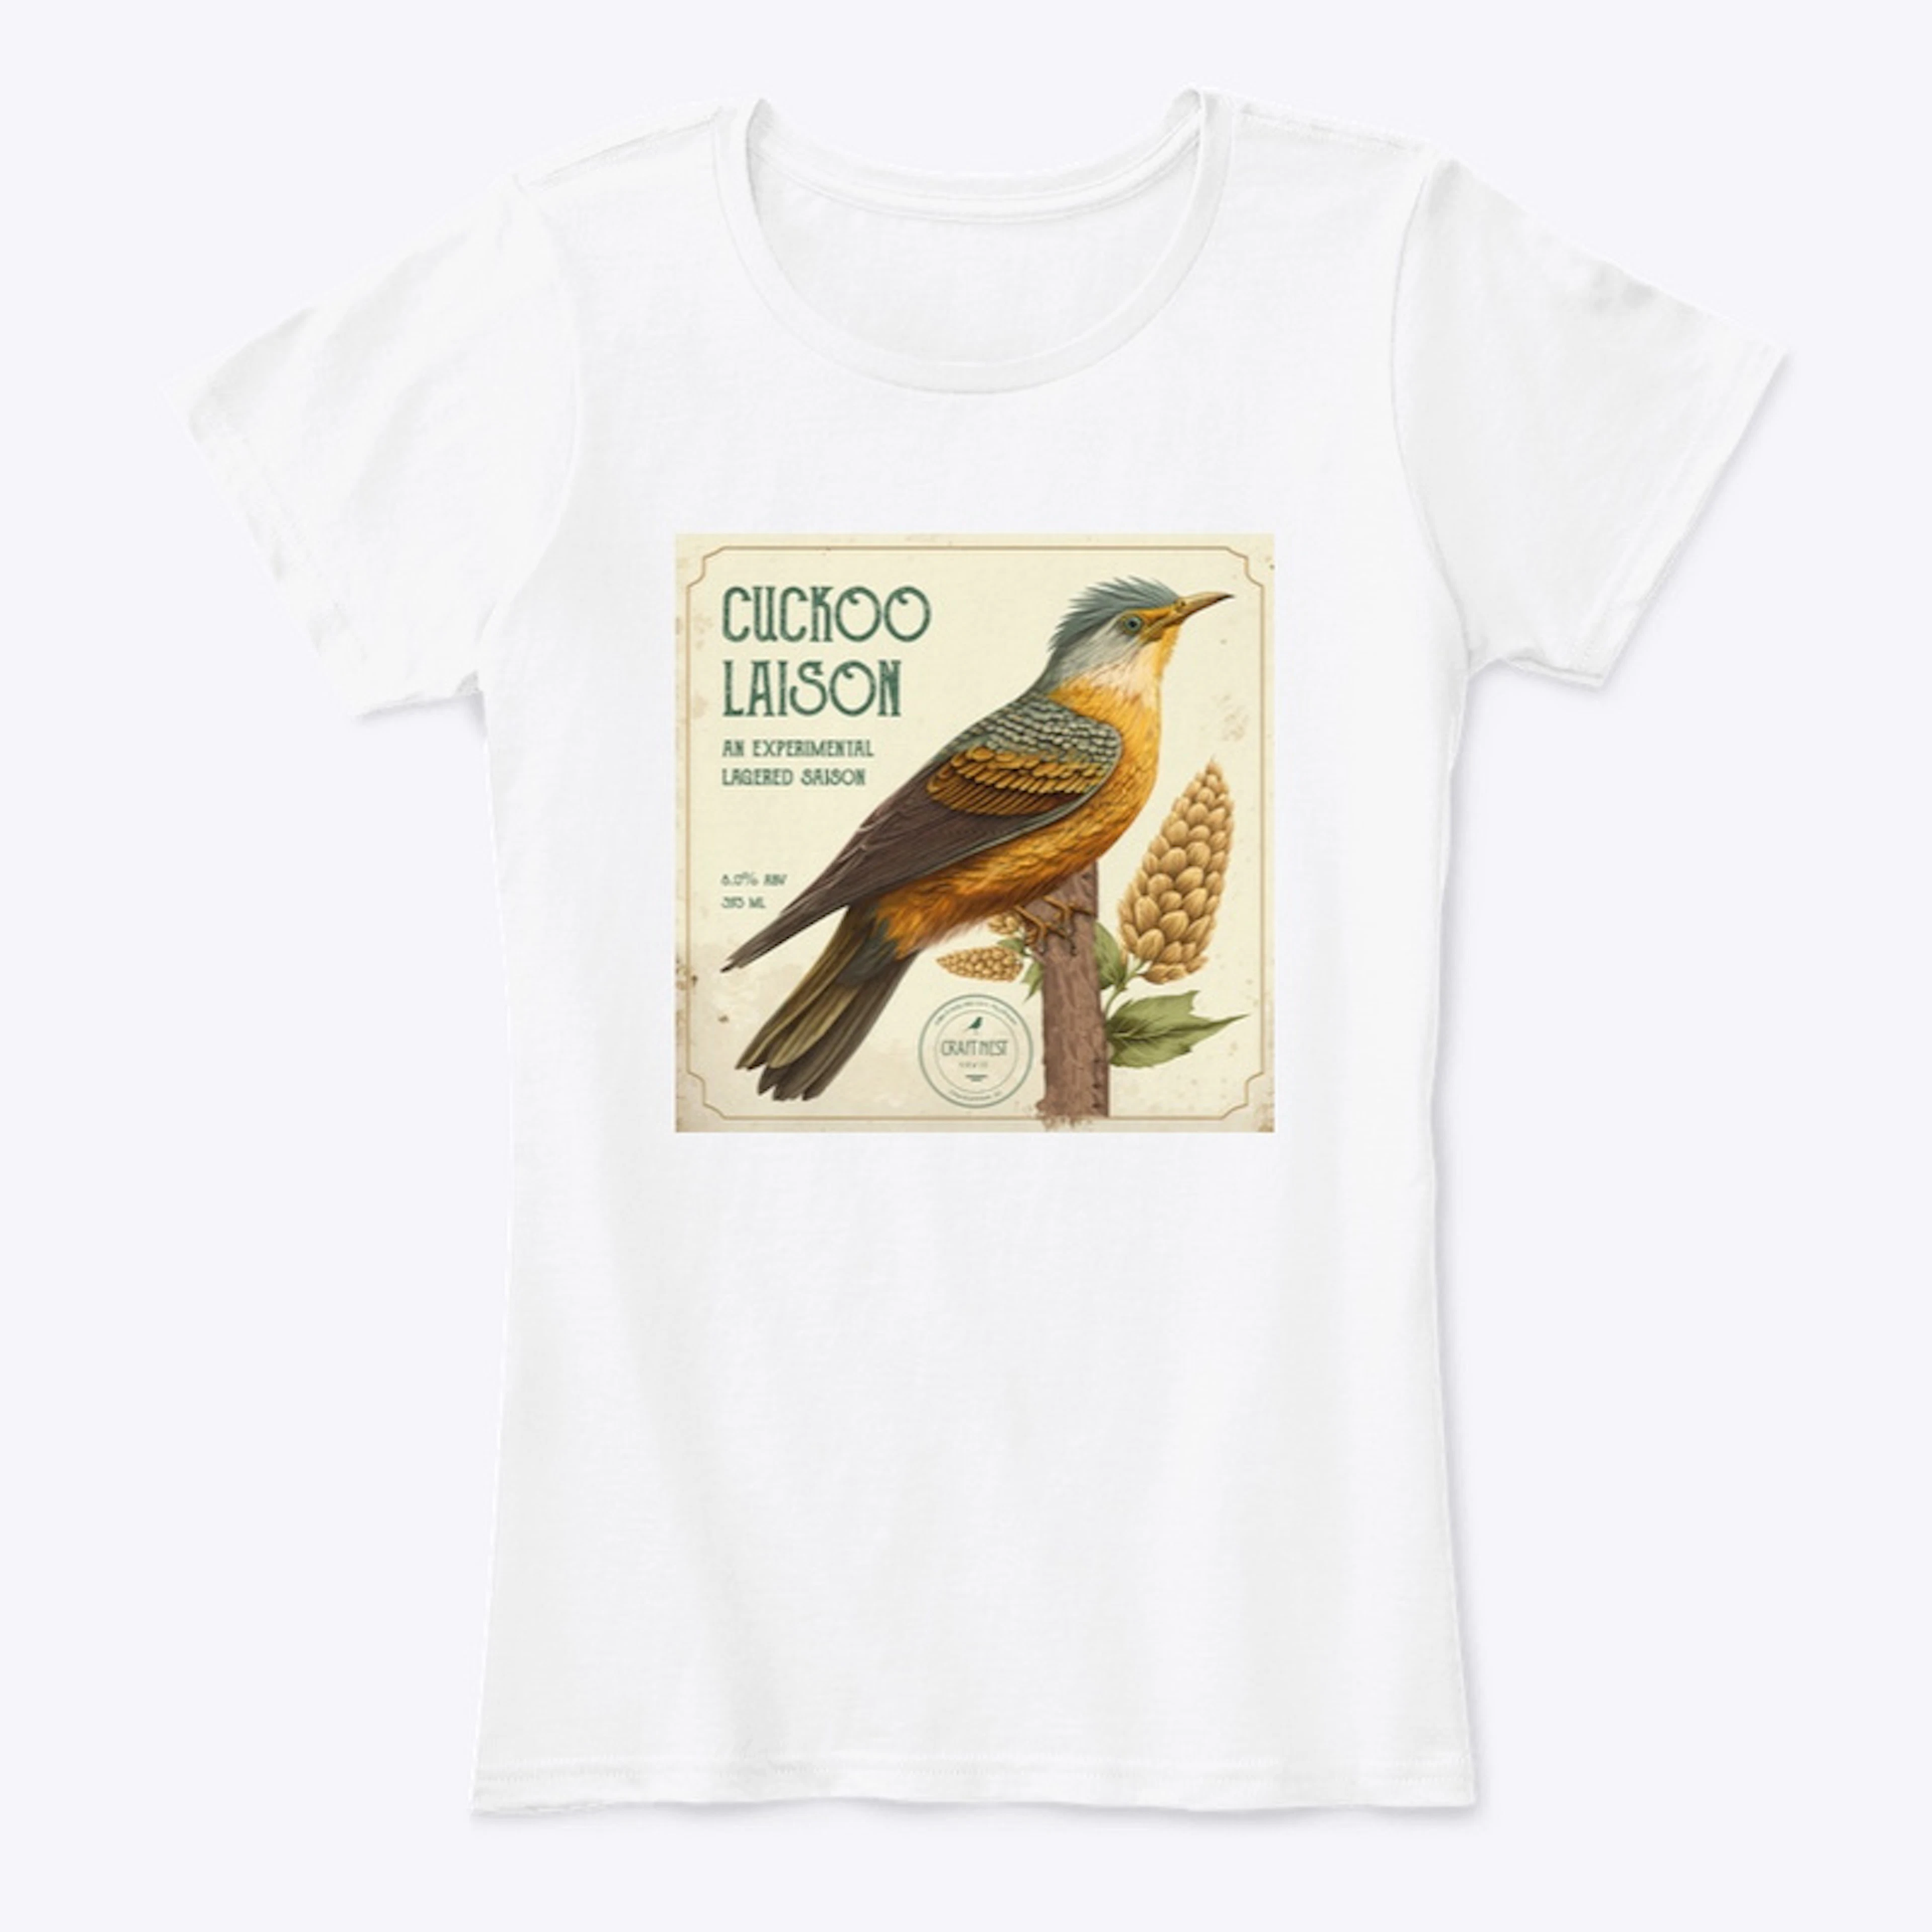 Cuckoo Laison Limited Edition